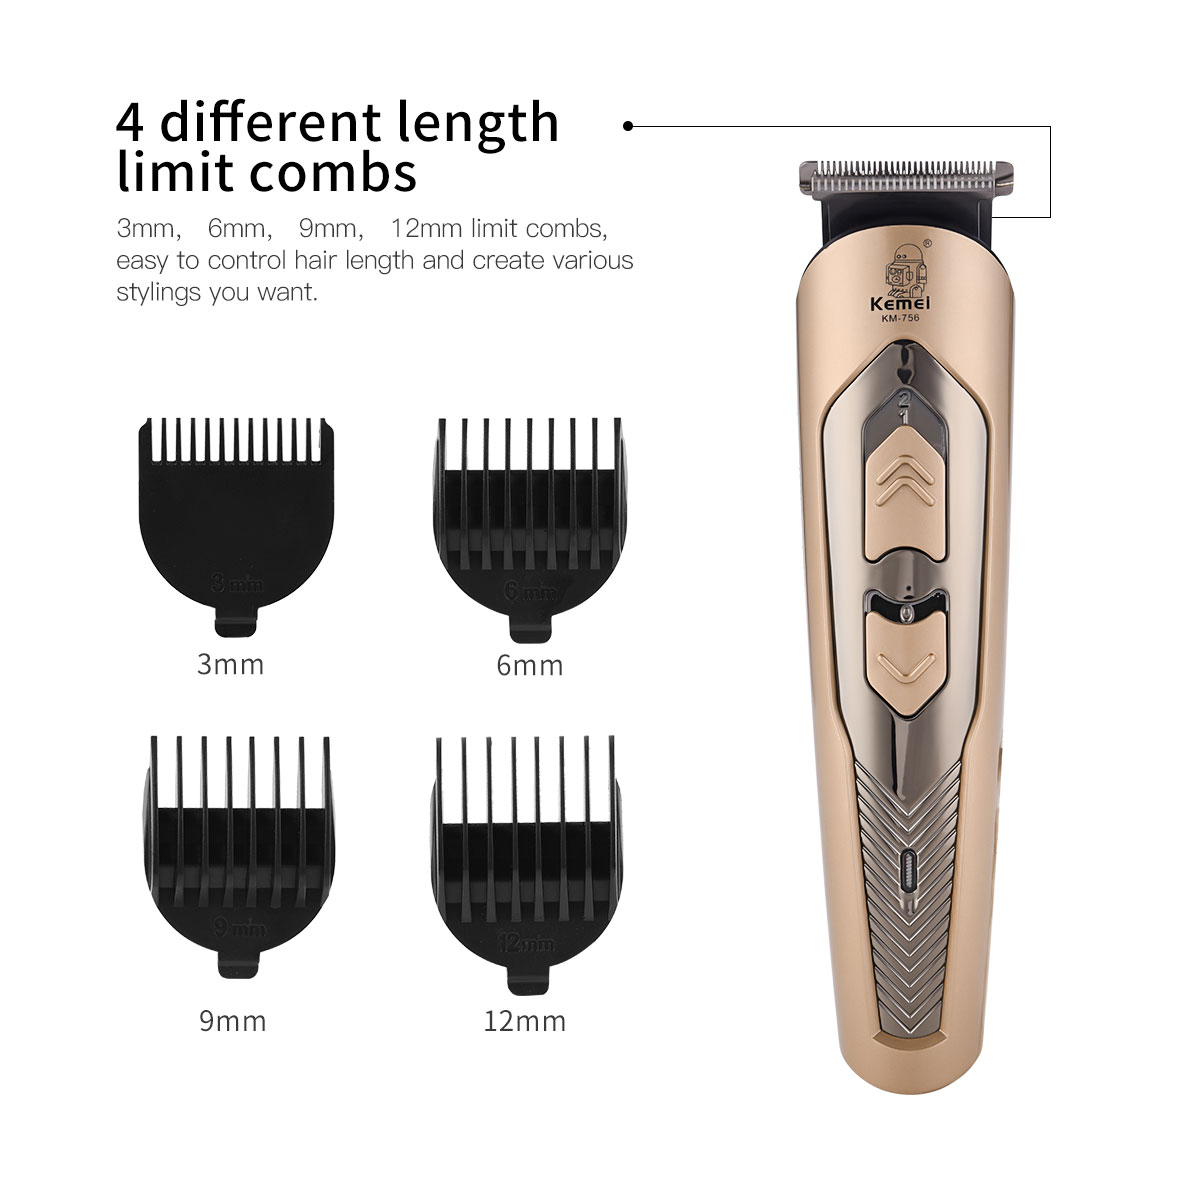 limit combs